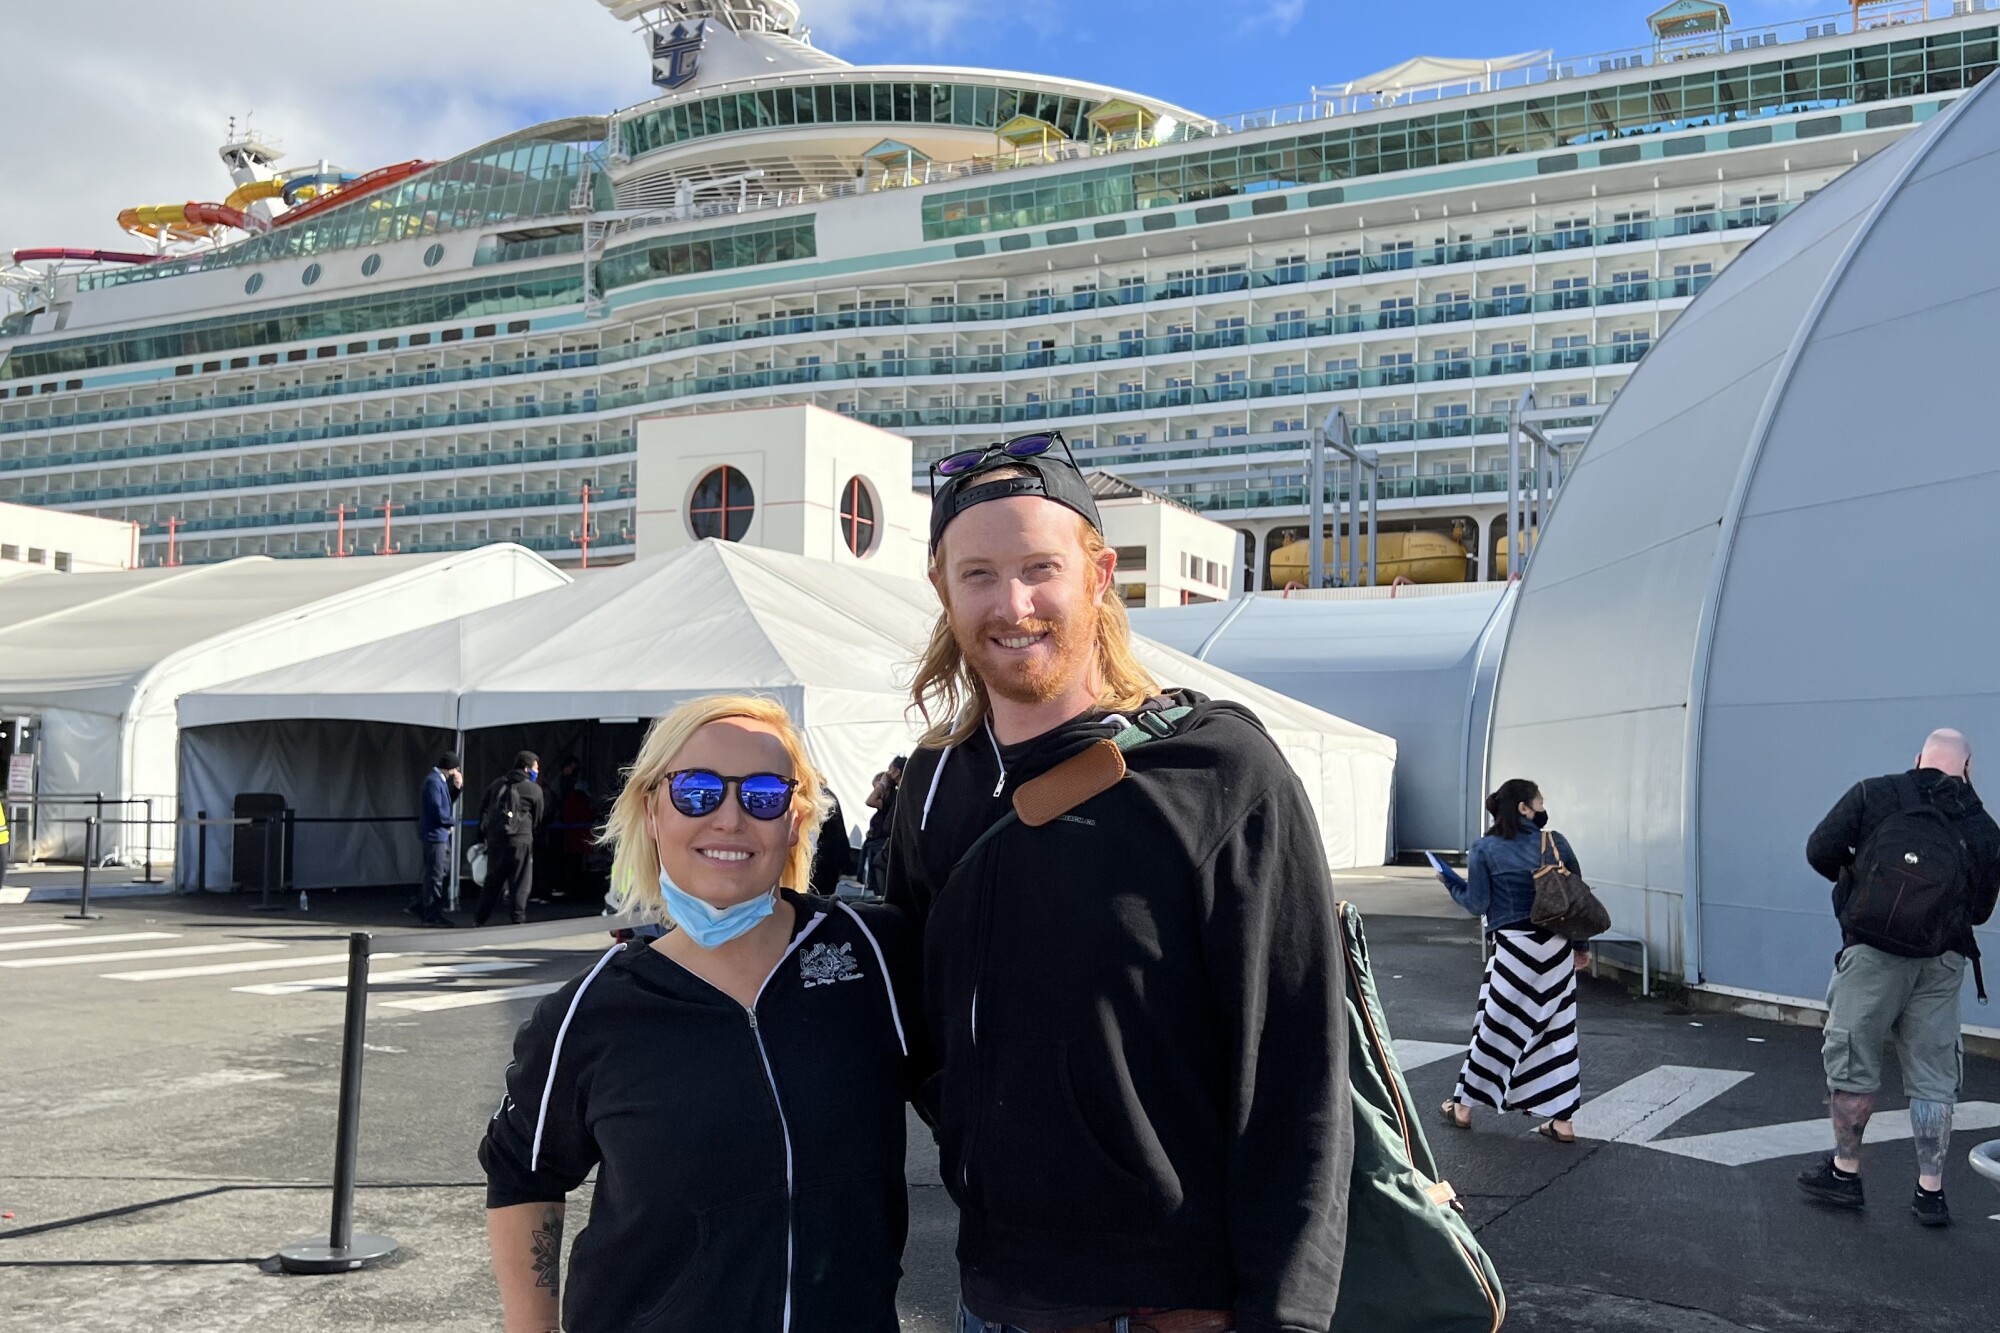 Jamie Robinson and Scott Bush spent the last four days of their Royal Caribbean cruise to Mexico quarantining on board.